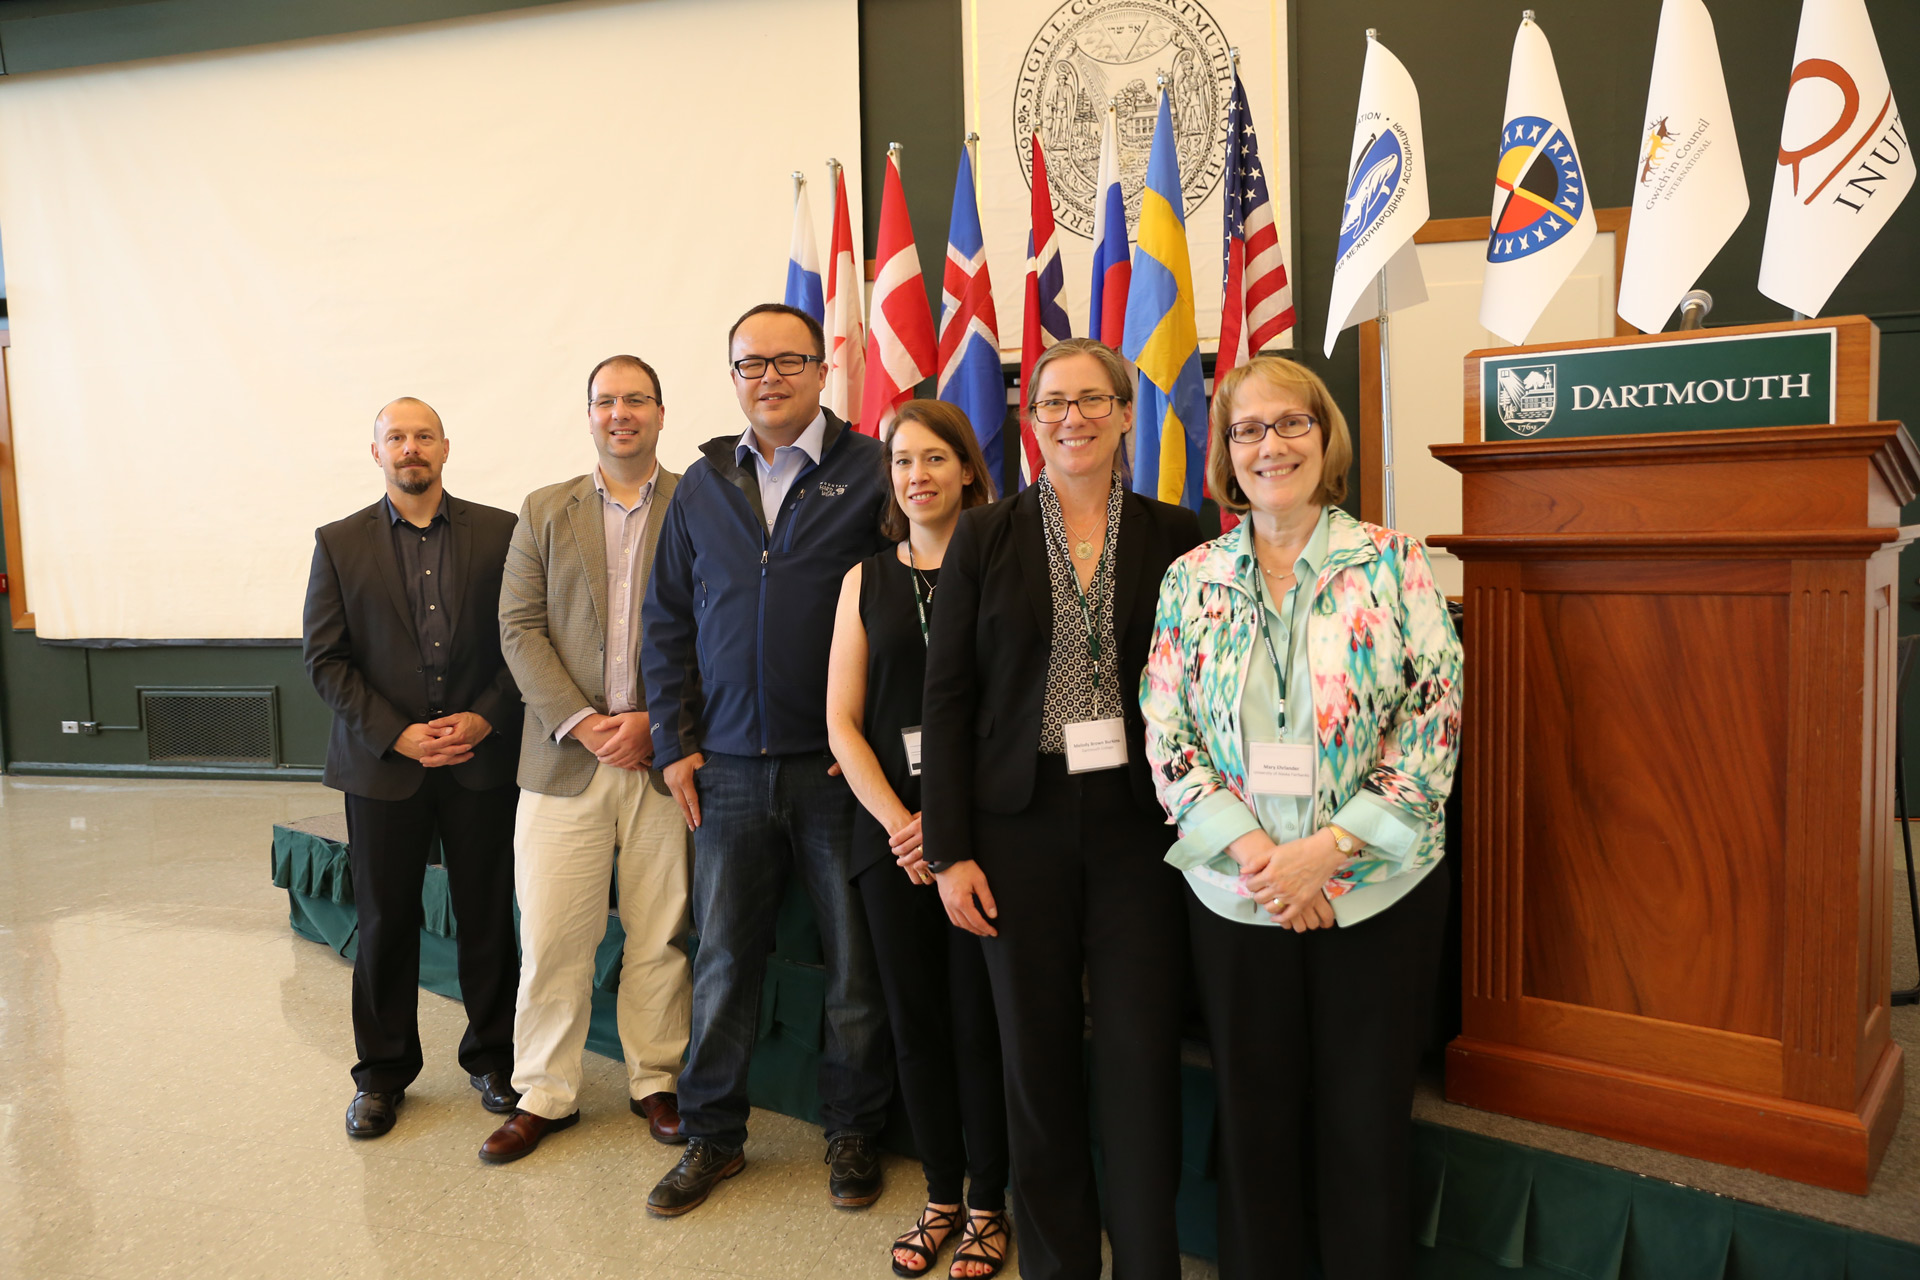 “Arctic Science Diplomacy and Leadership Workshop & Model Arctic Council” program organizers with Gwich'in Council International delegate to the Arctic Council, from left: Troy Bouffard, Brandon Boylan, Edward Alexander, Leah Sarson, Melody Brown Burkins, and Mary Ehrlander